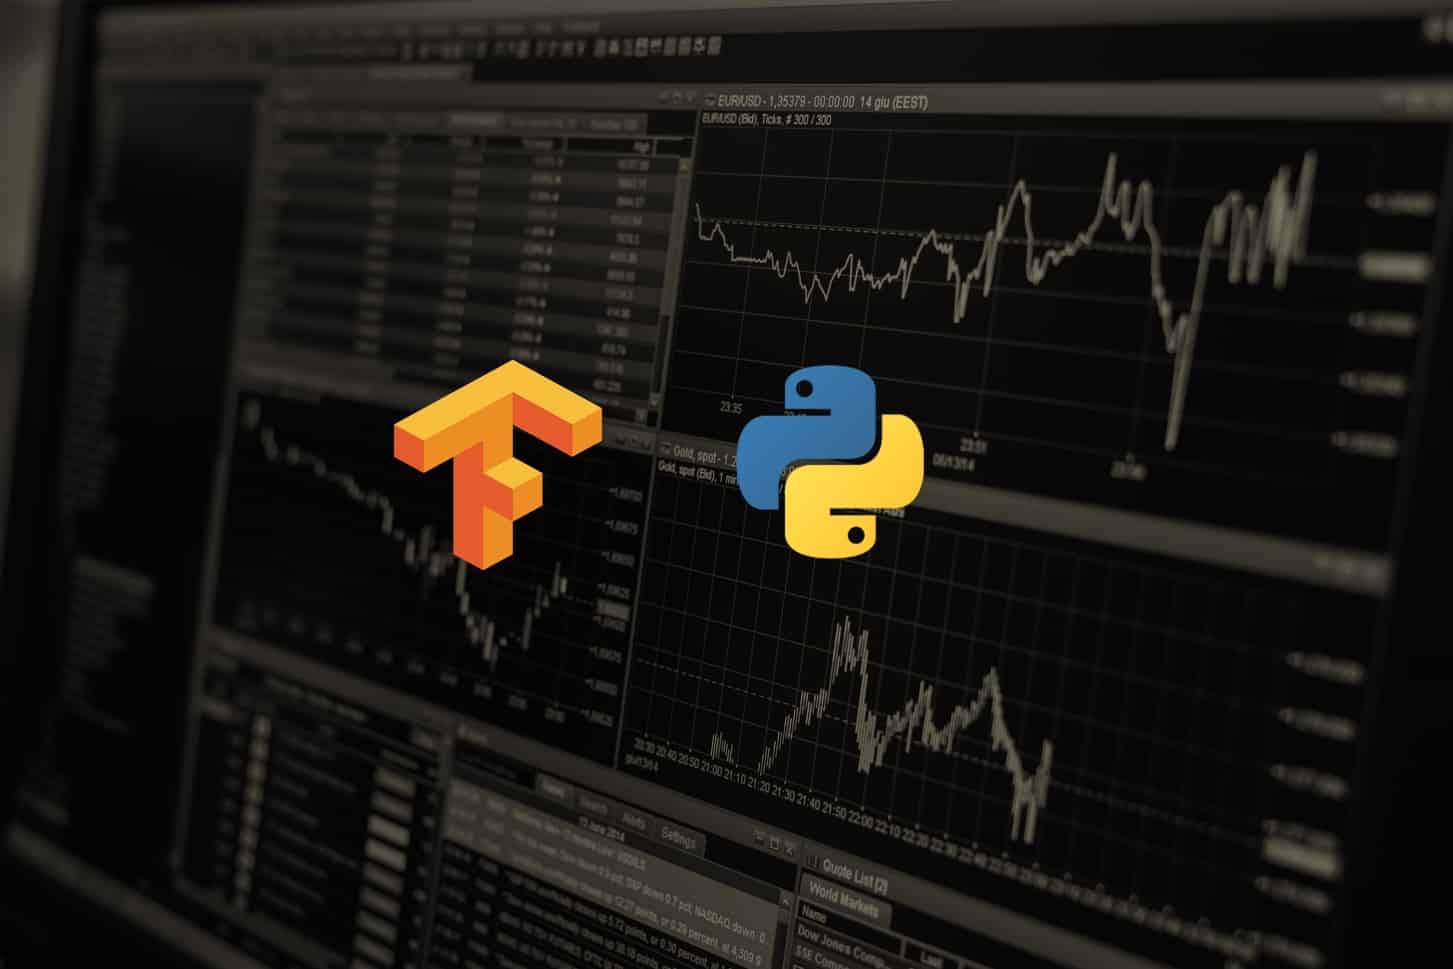 How to Predict Stock Prices in Python using TensorFlow 2 and Keras